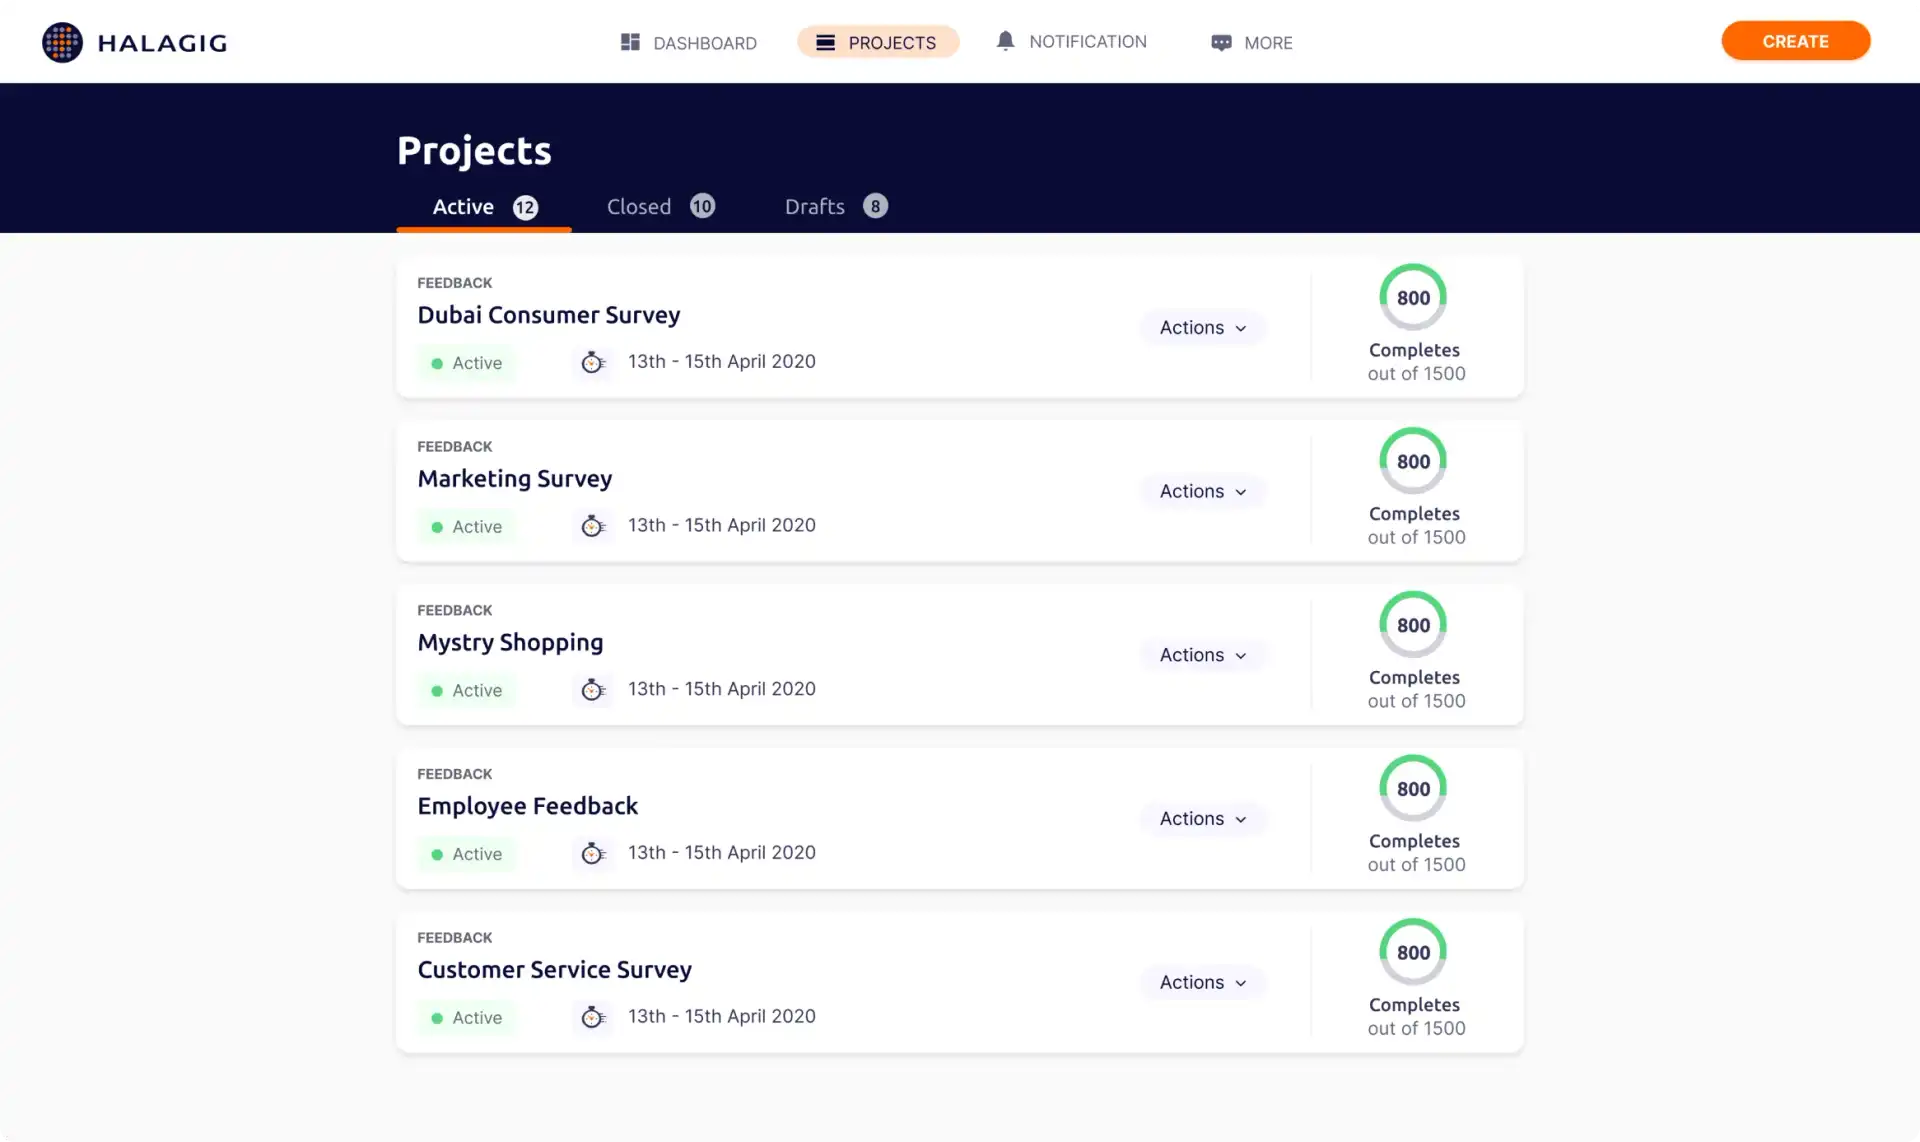 UI screen to check each project feedback status